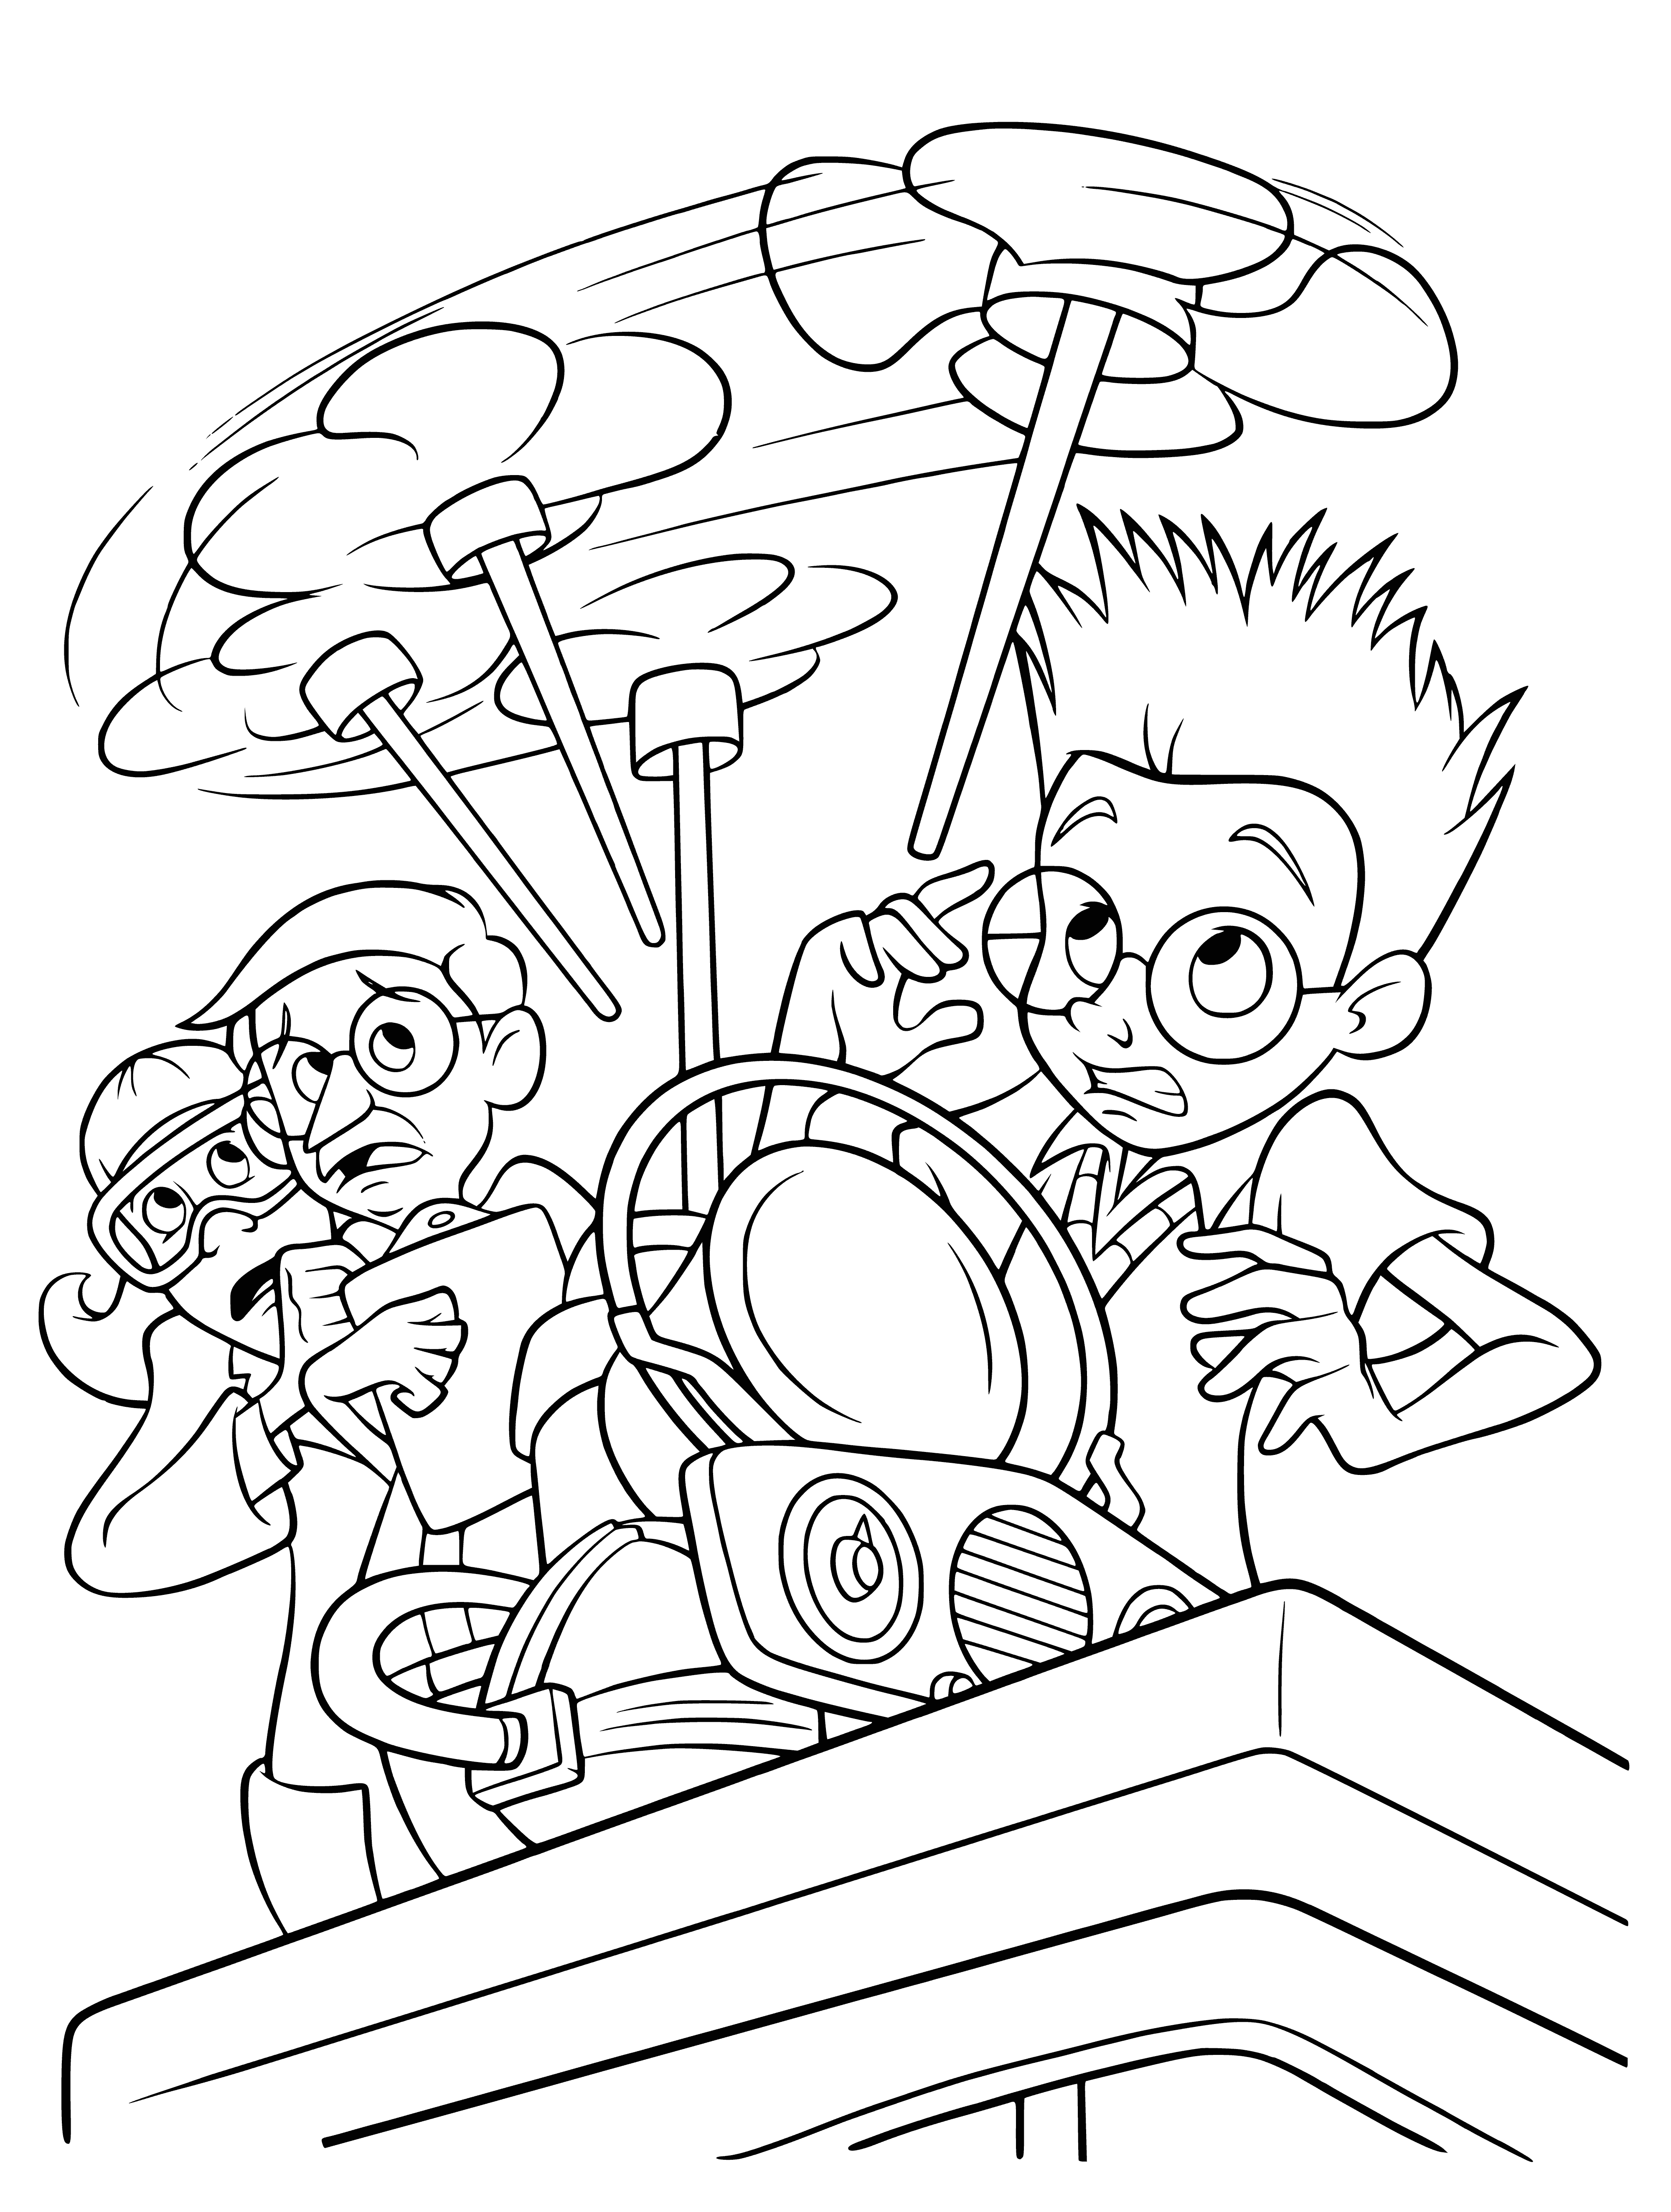 Problems coloring page